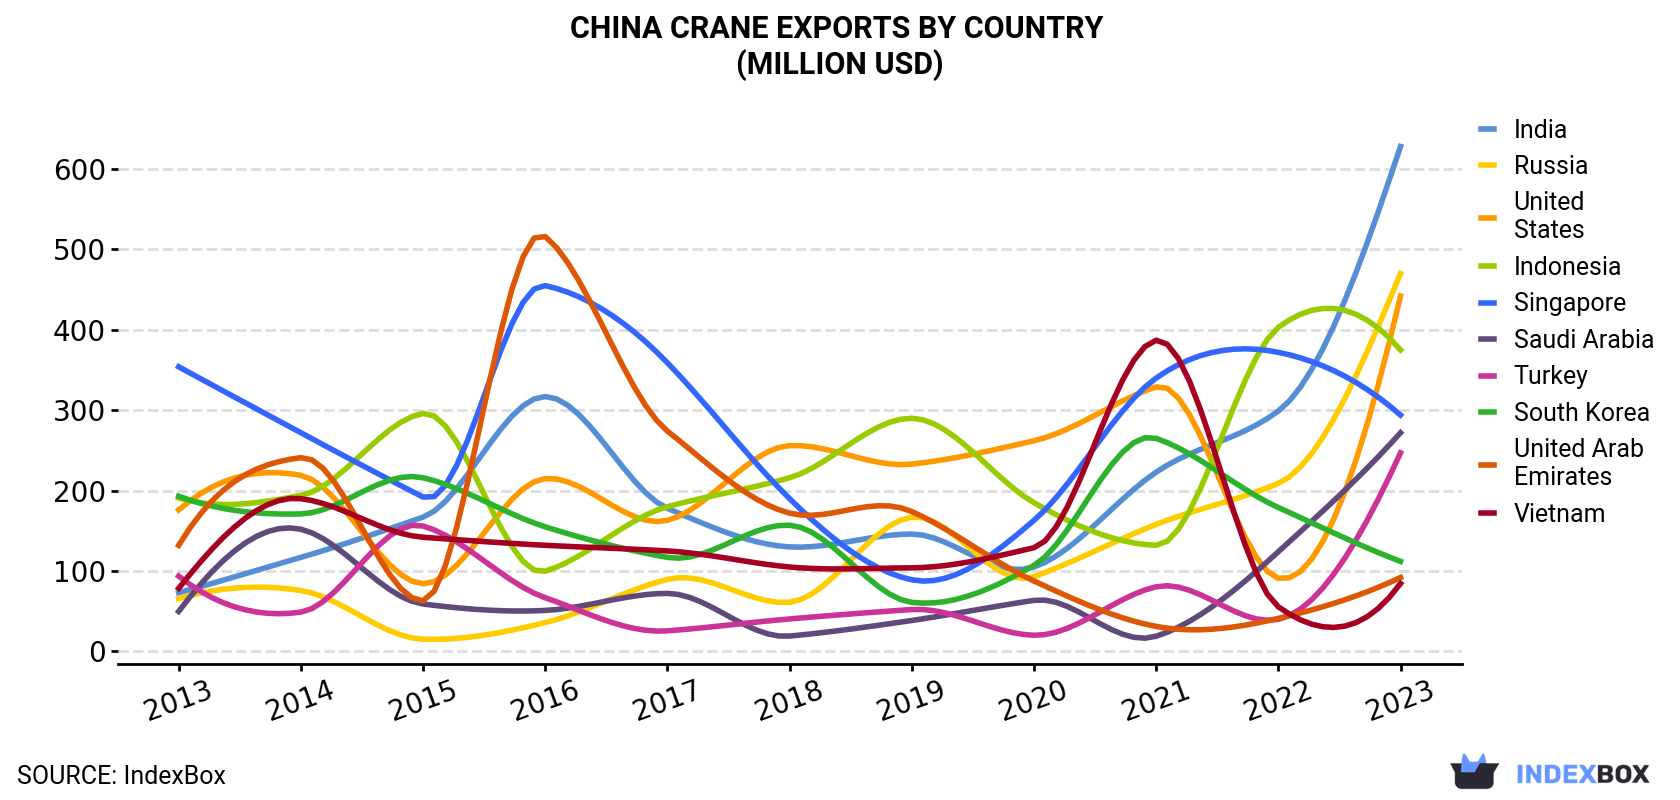 China Crane Exports By Country (Million USD)